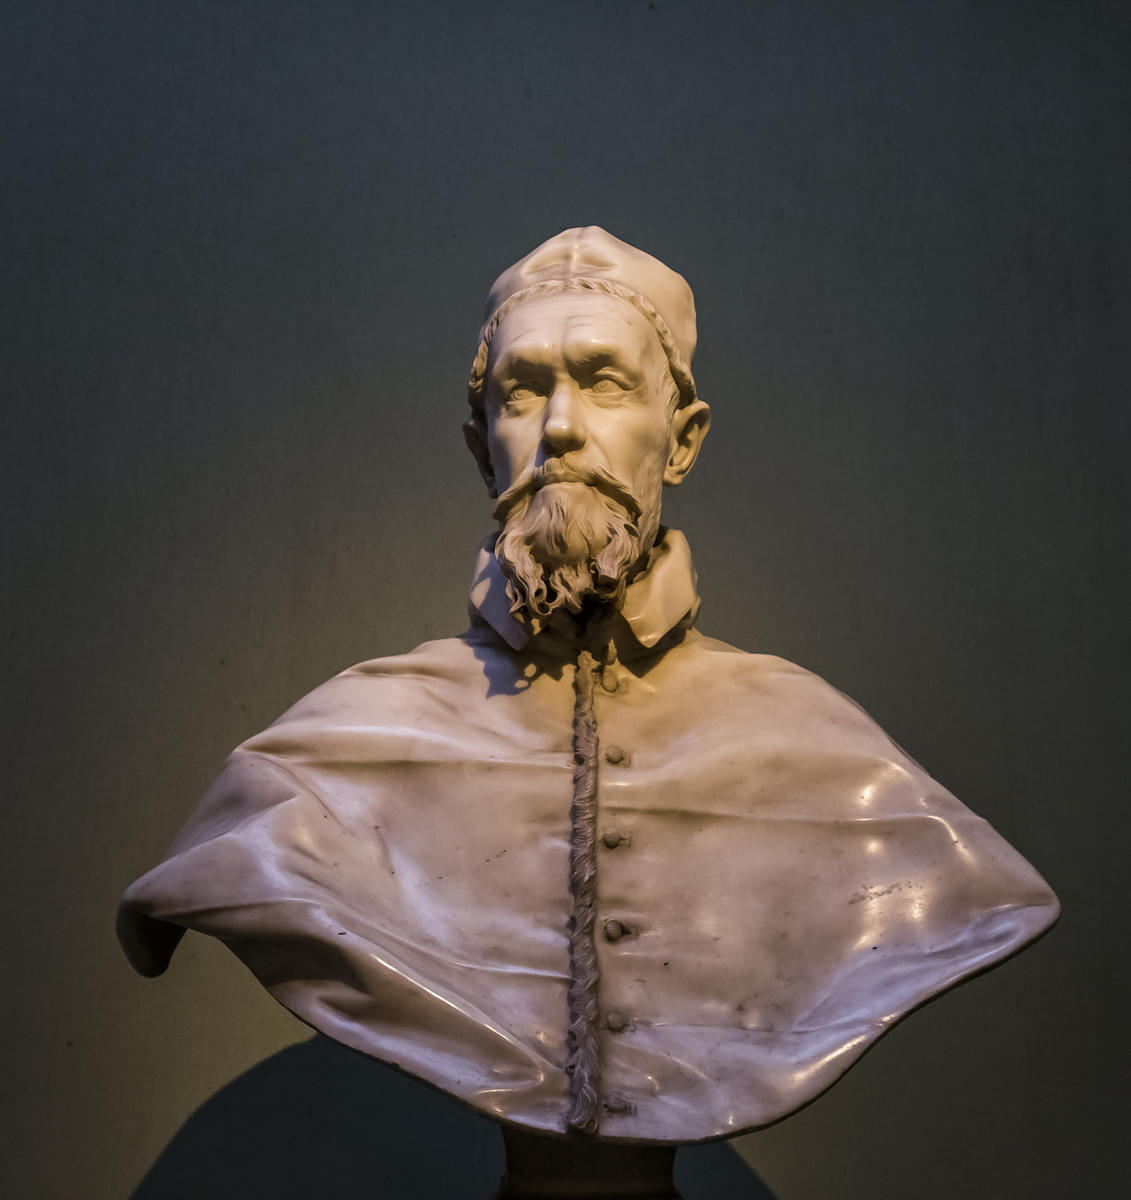 Have a look at the bust of Pope Innocent X